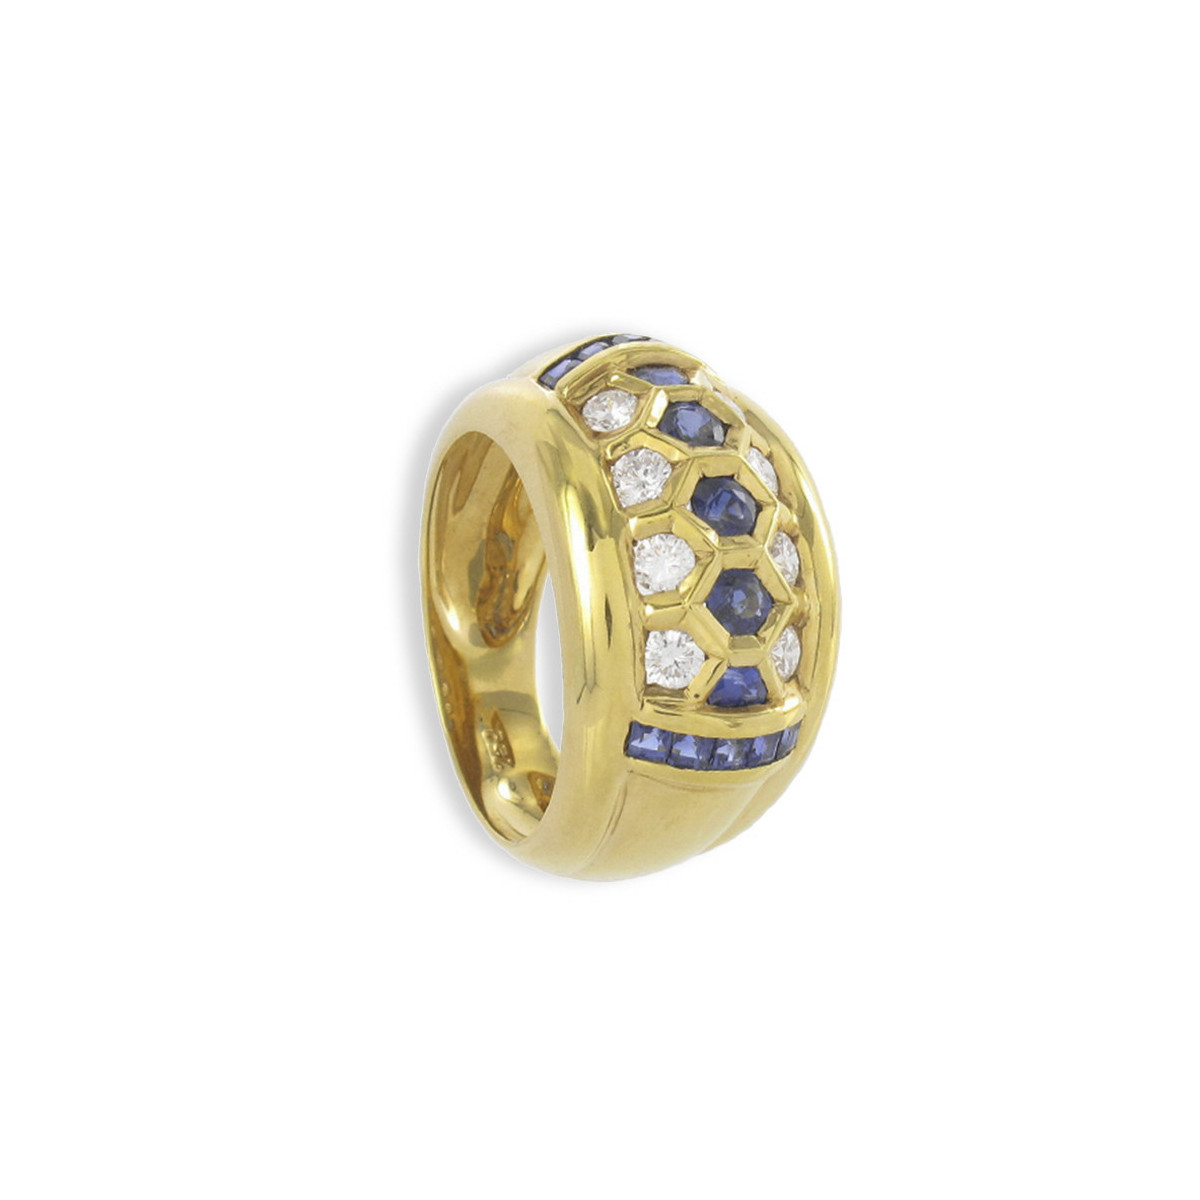 YELLOW GOLD RING WITH PRECIOUS STONES